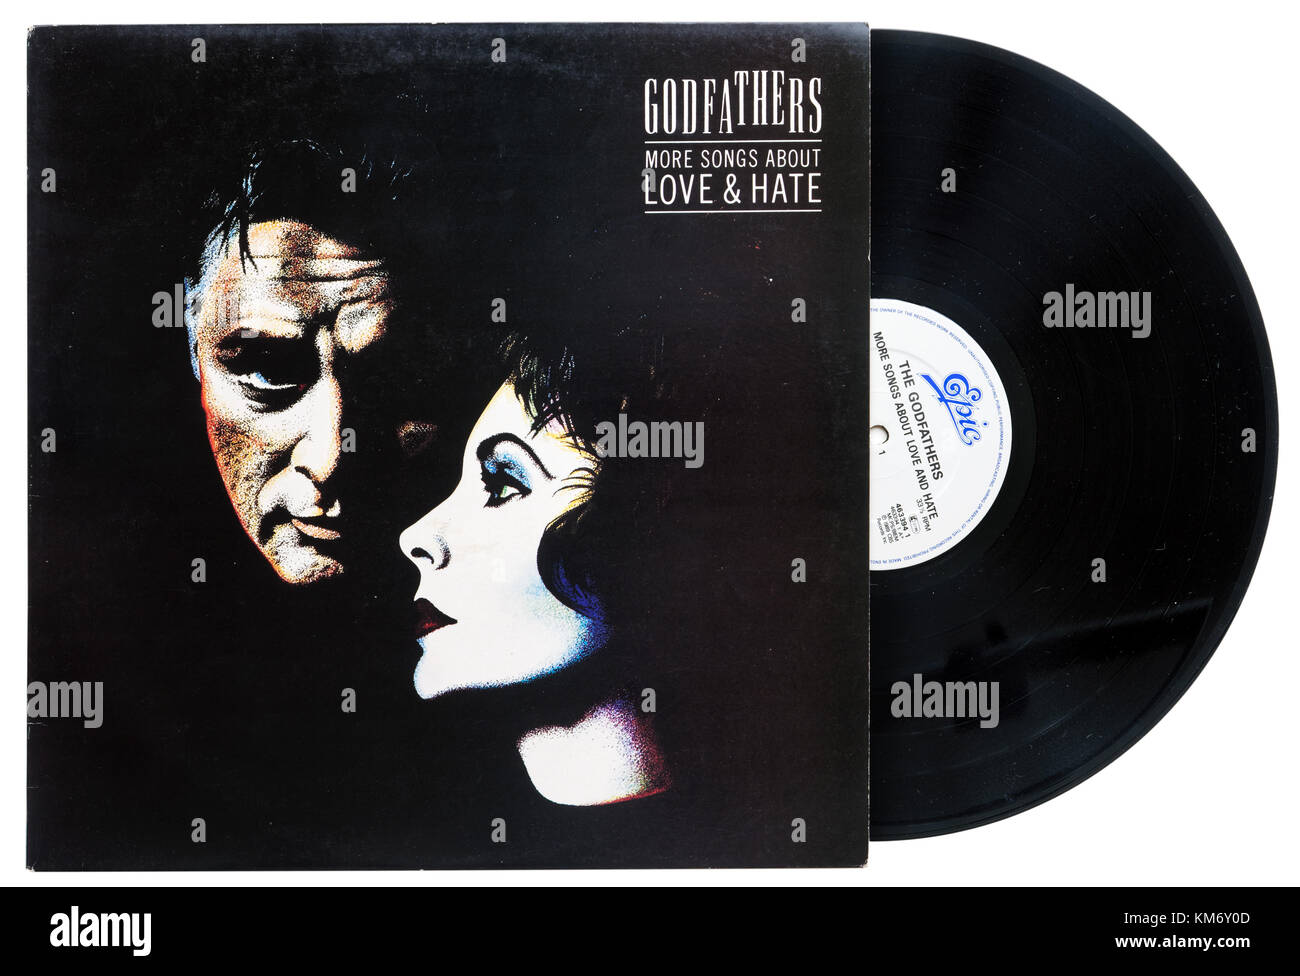 Godfathers More Songs a ABout Love and hate album Stock Photo